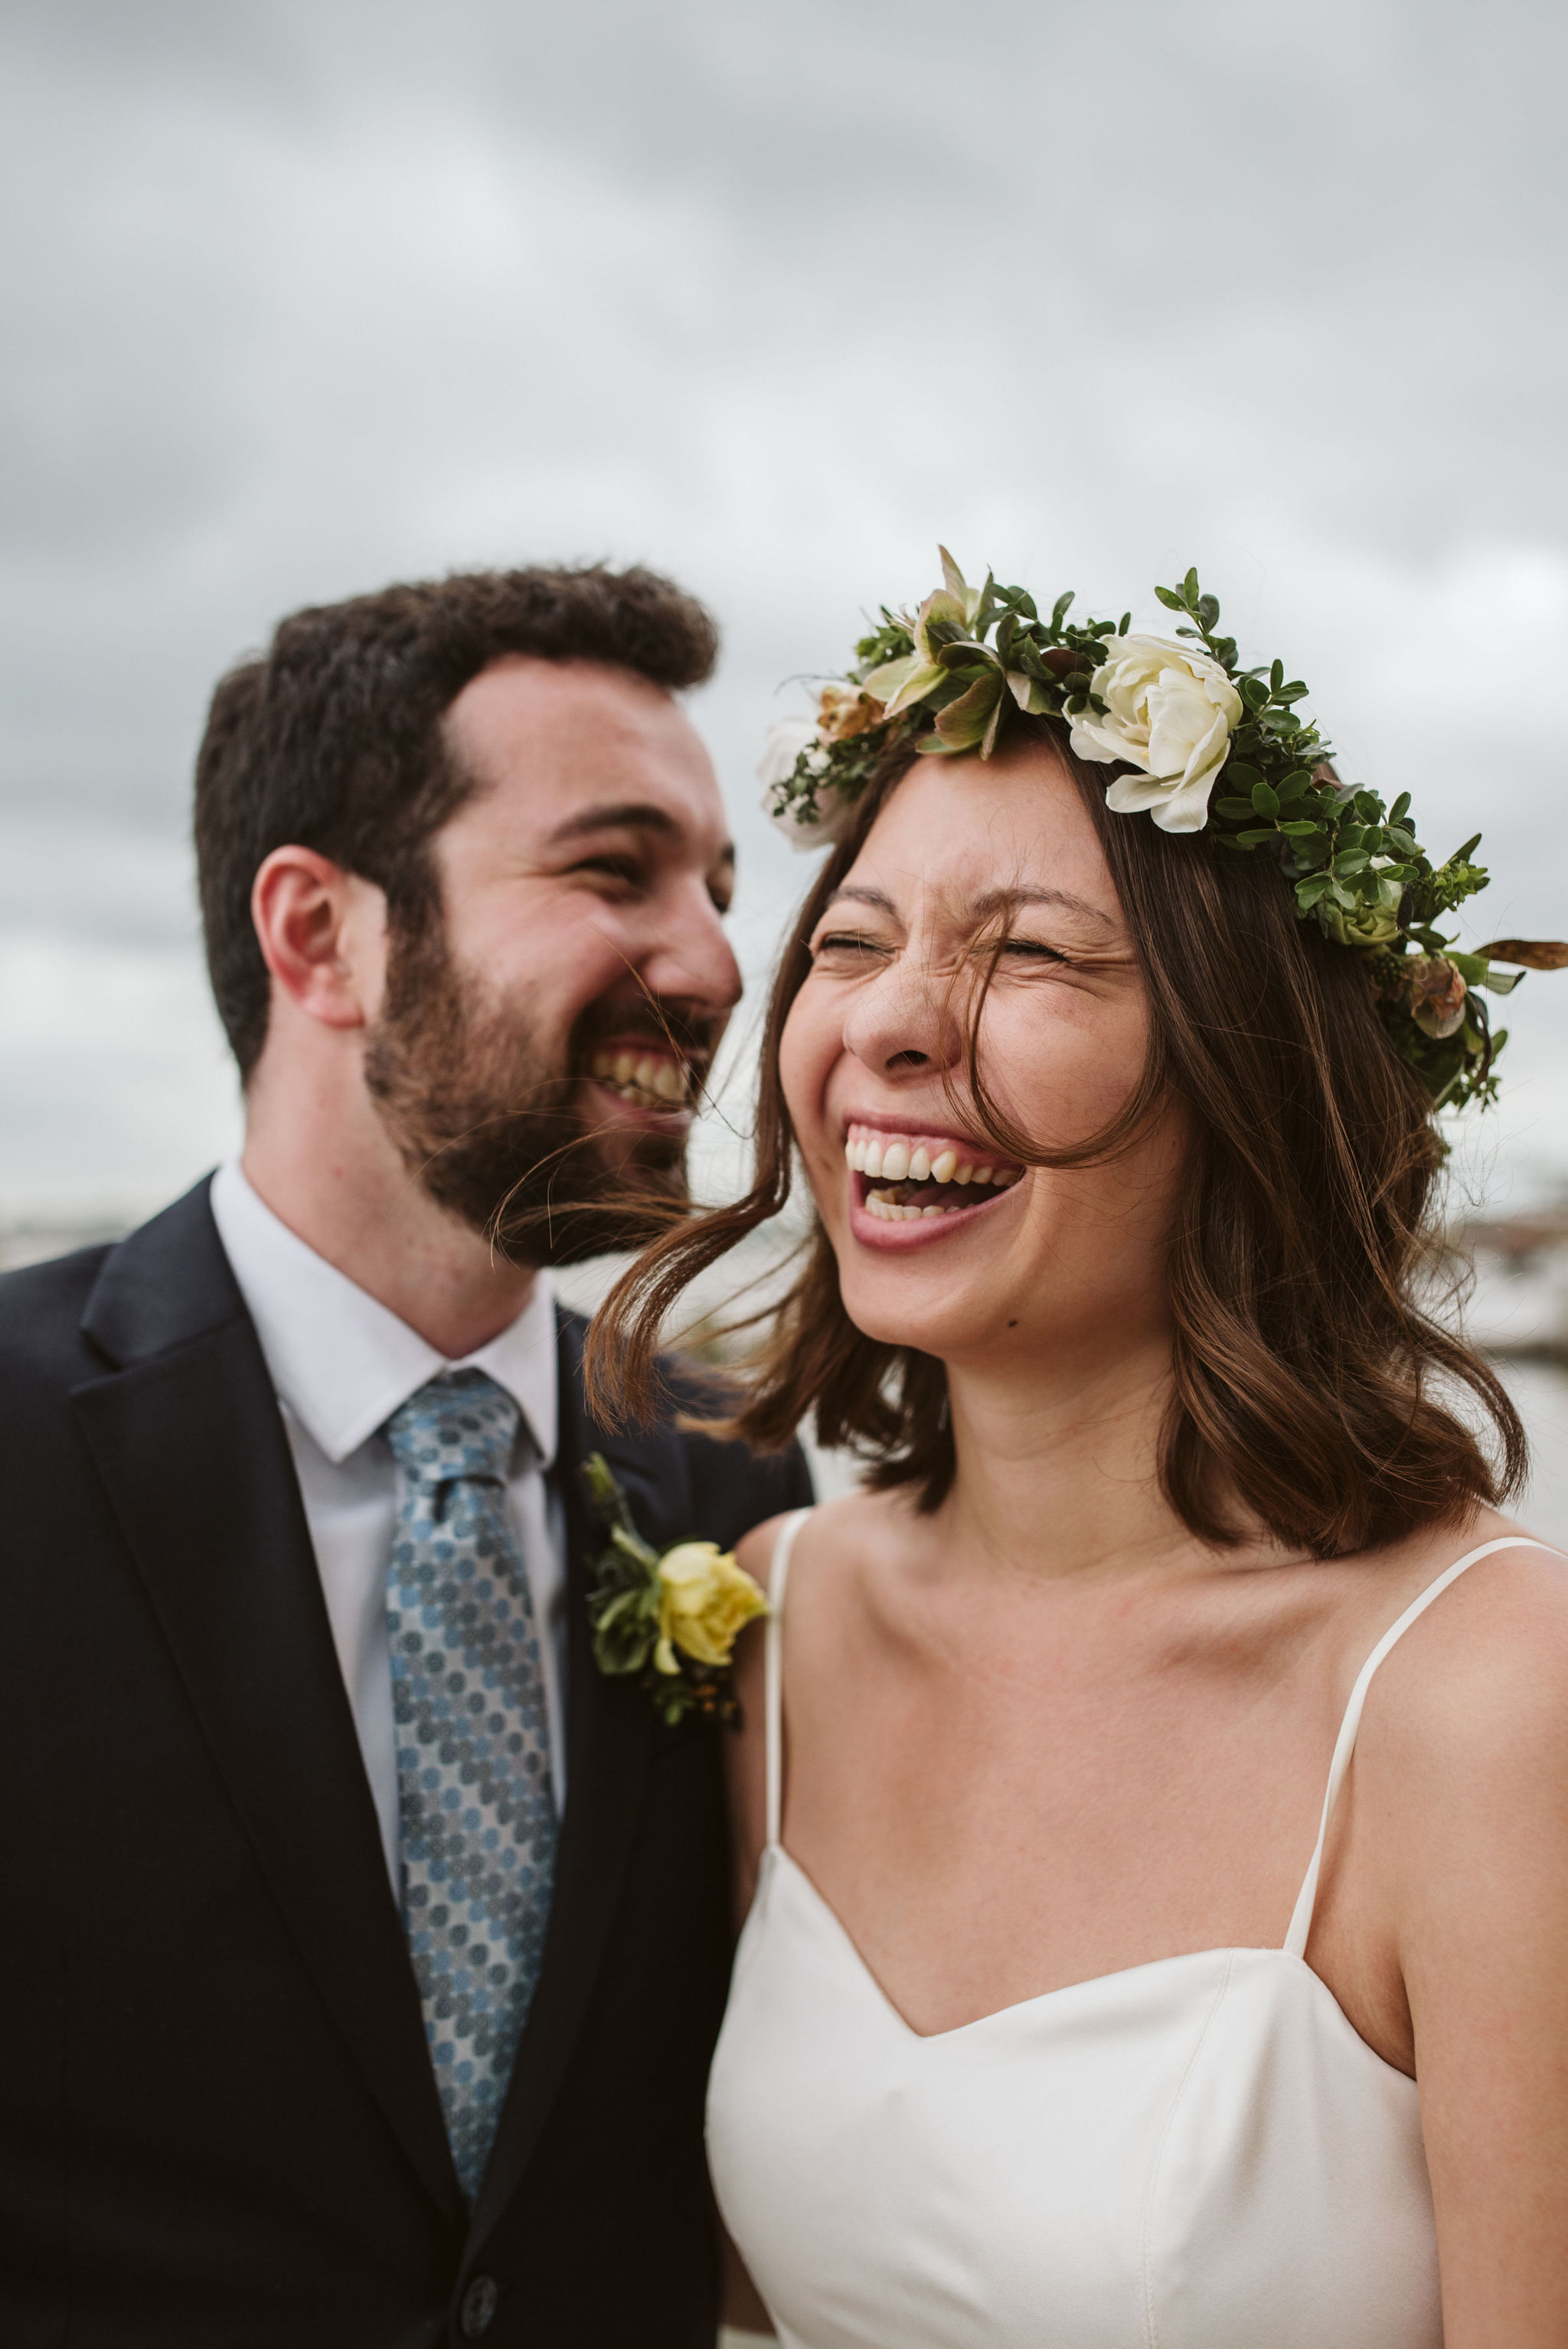  Washington DC, Baltimore Wedding Photographer, Alexandria, Old Town, Jewel Tone, Romantic, Modern, Candid Portrait of Bride and Groom Laughing 